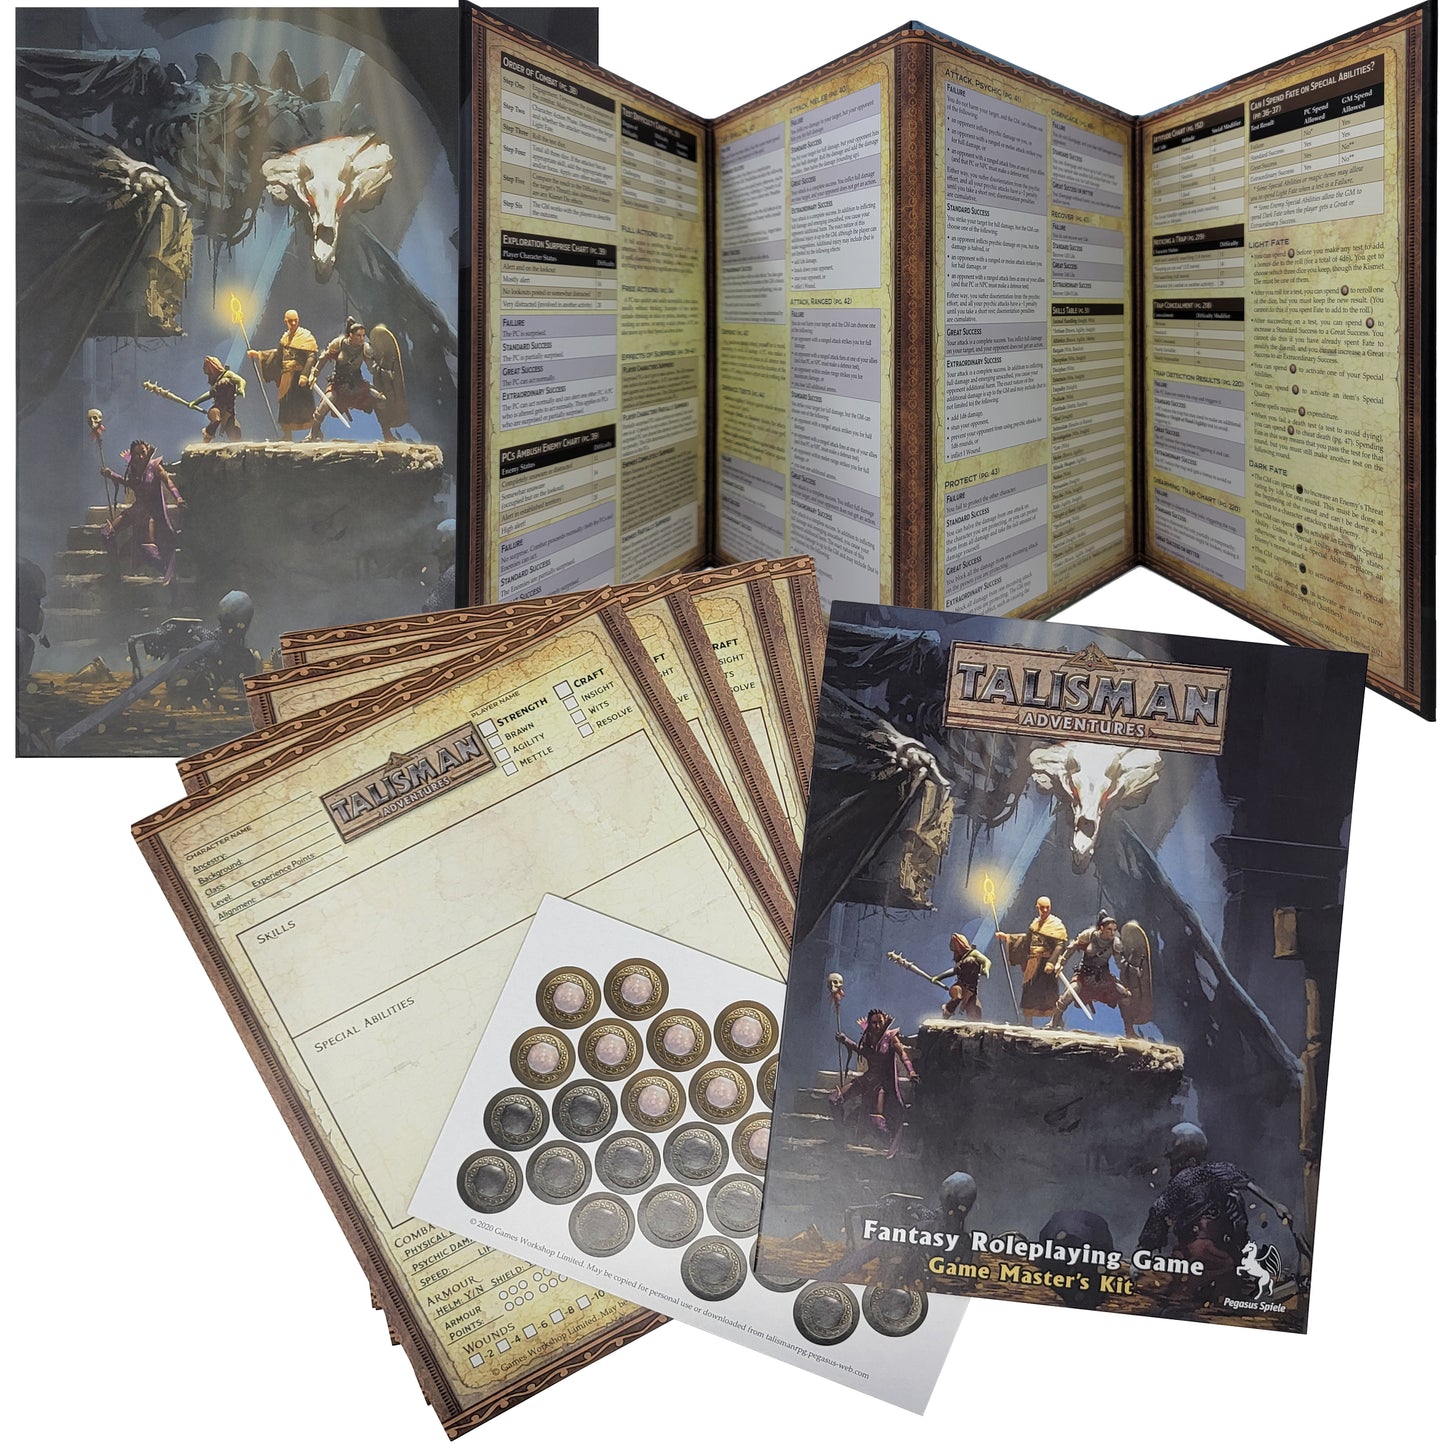 Fantasy Roleplaying Game Talisman Adventure Playtest Guide,  Game Master Kit and Accessory Pack With Random Color Drawstring Bag